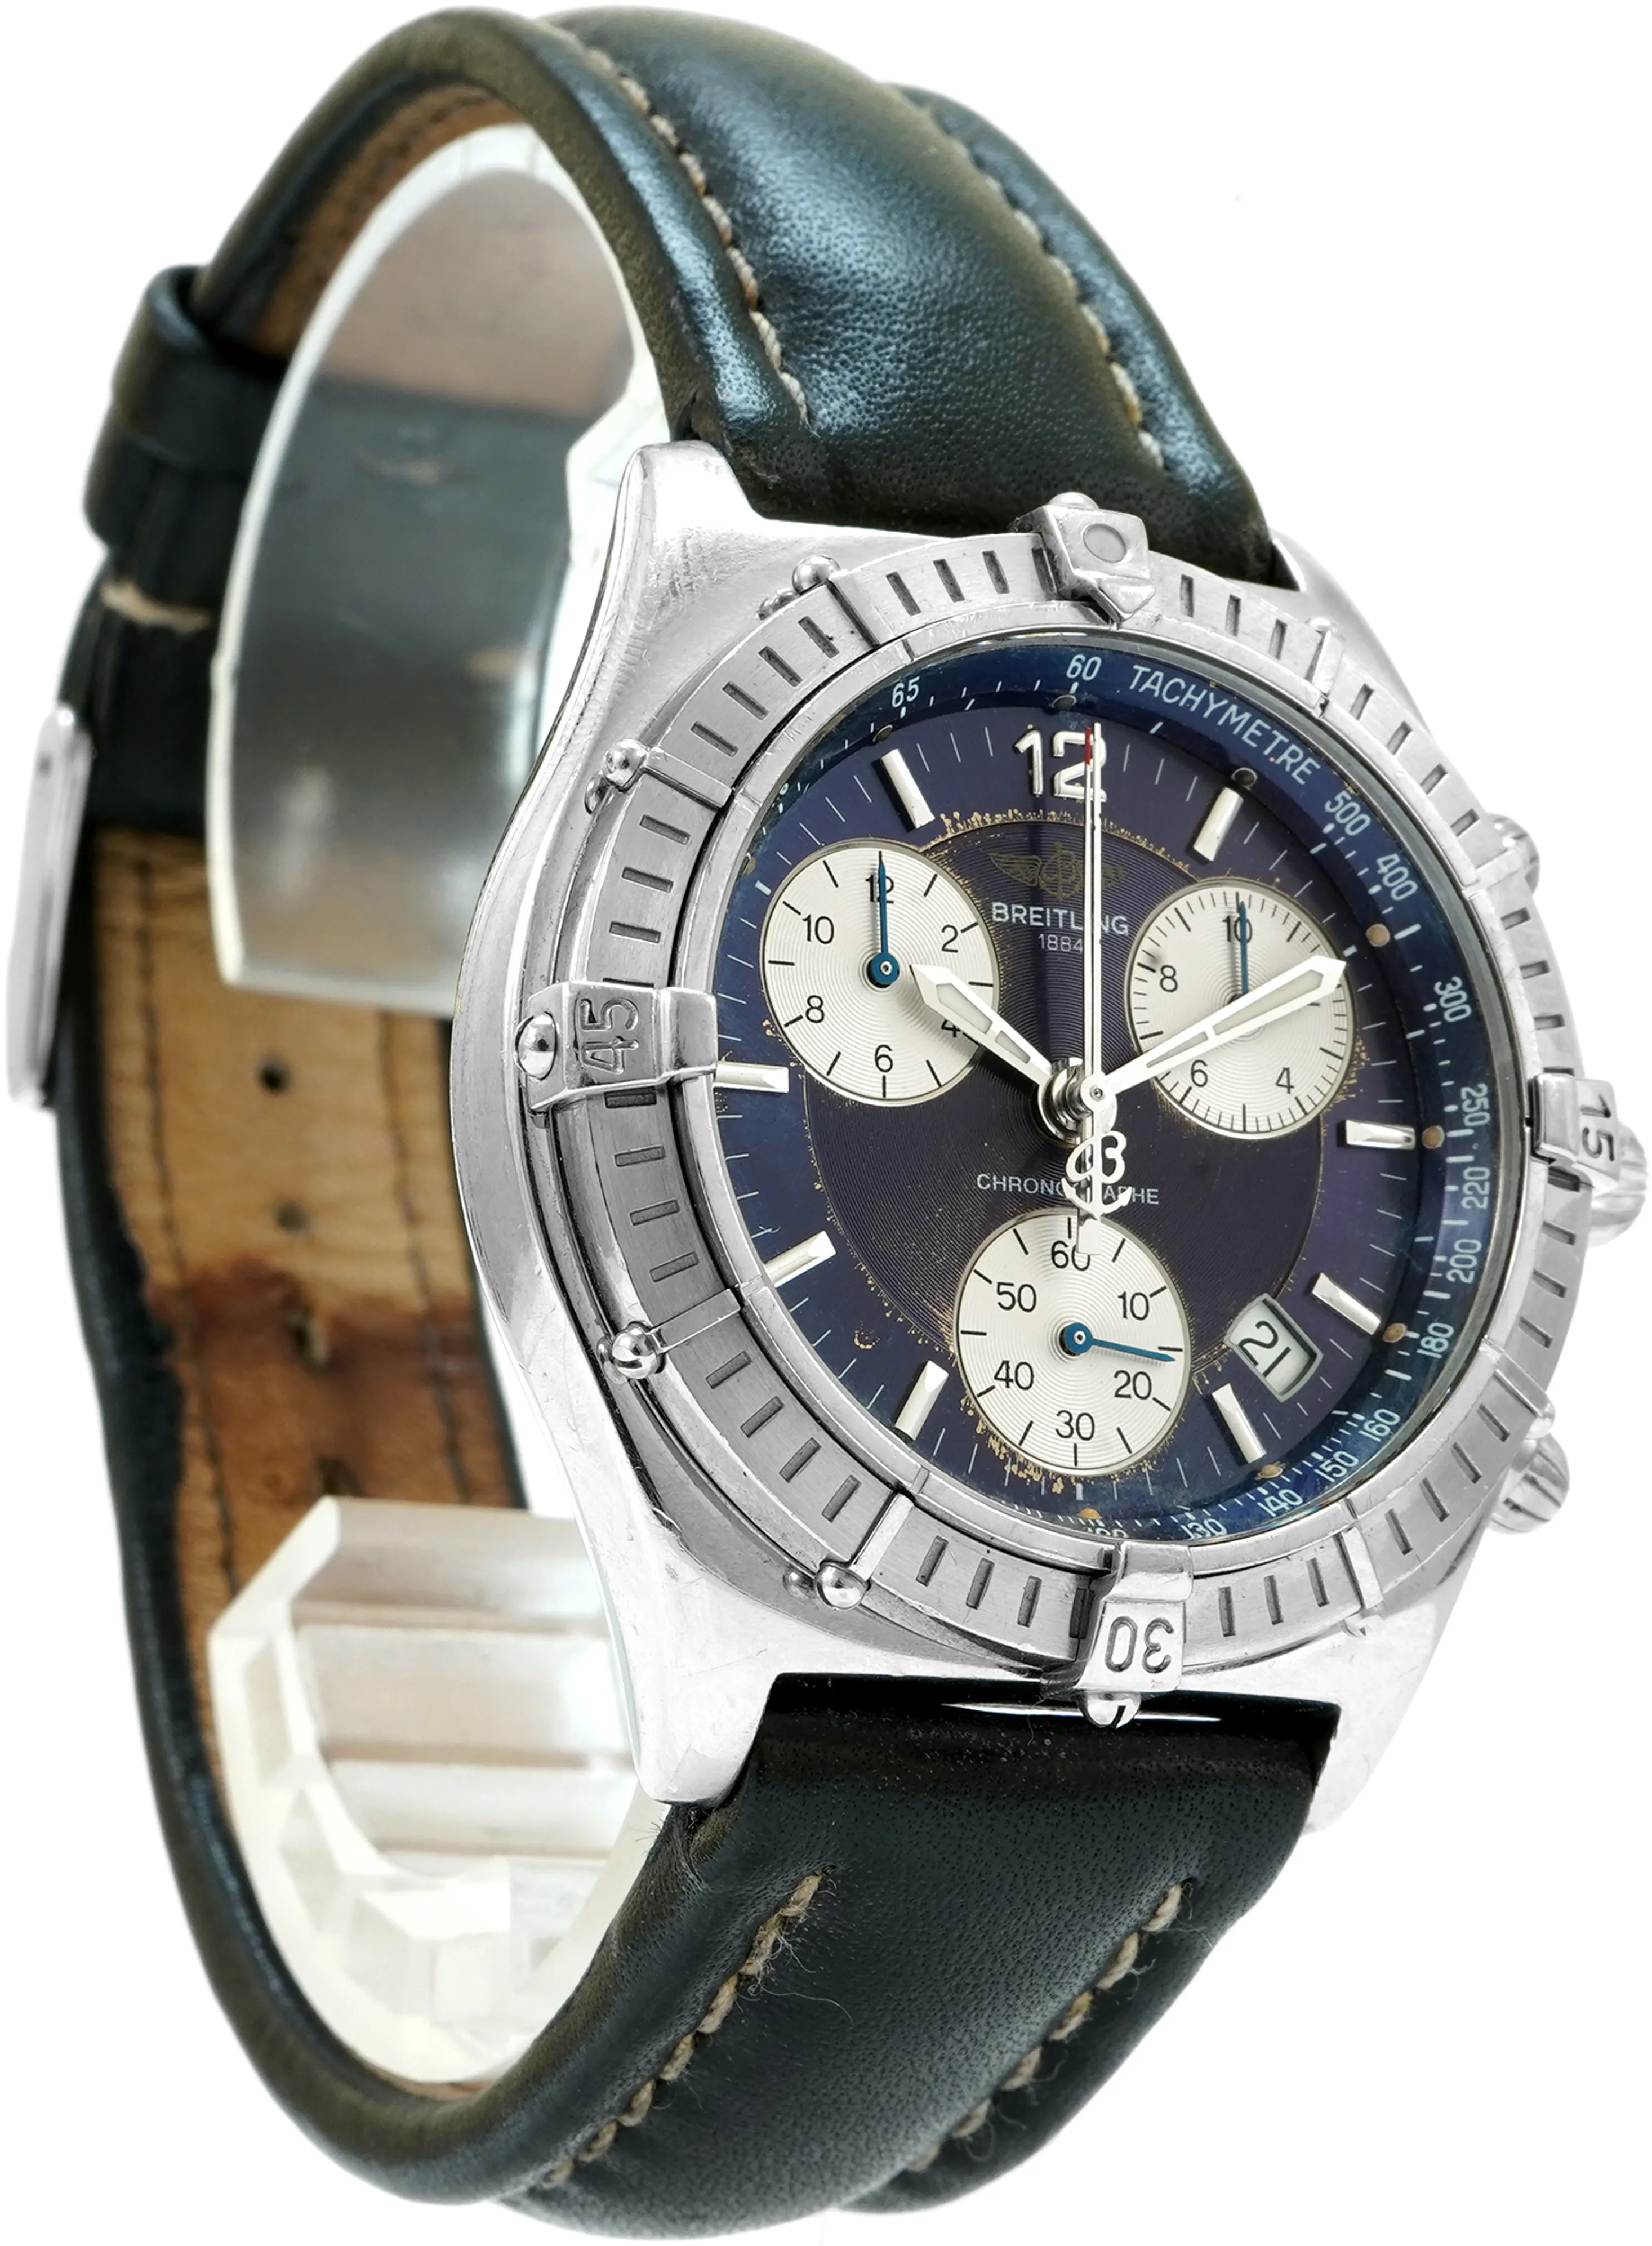 Breitling Windrider A53011 40mm Stainless steel 2